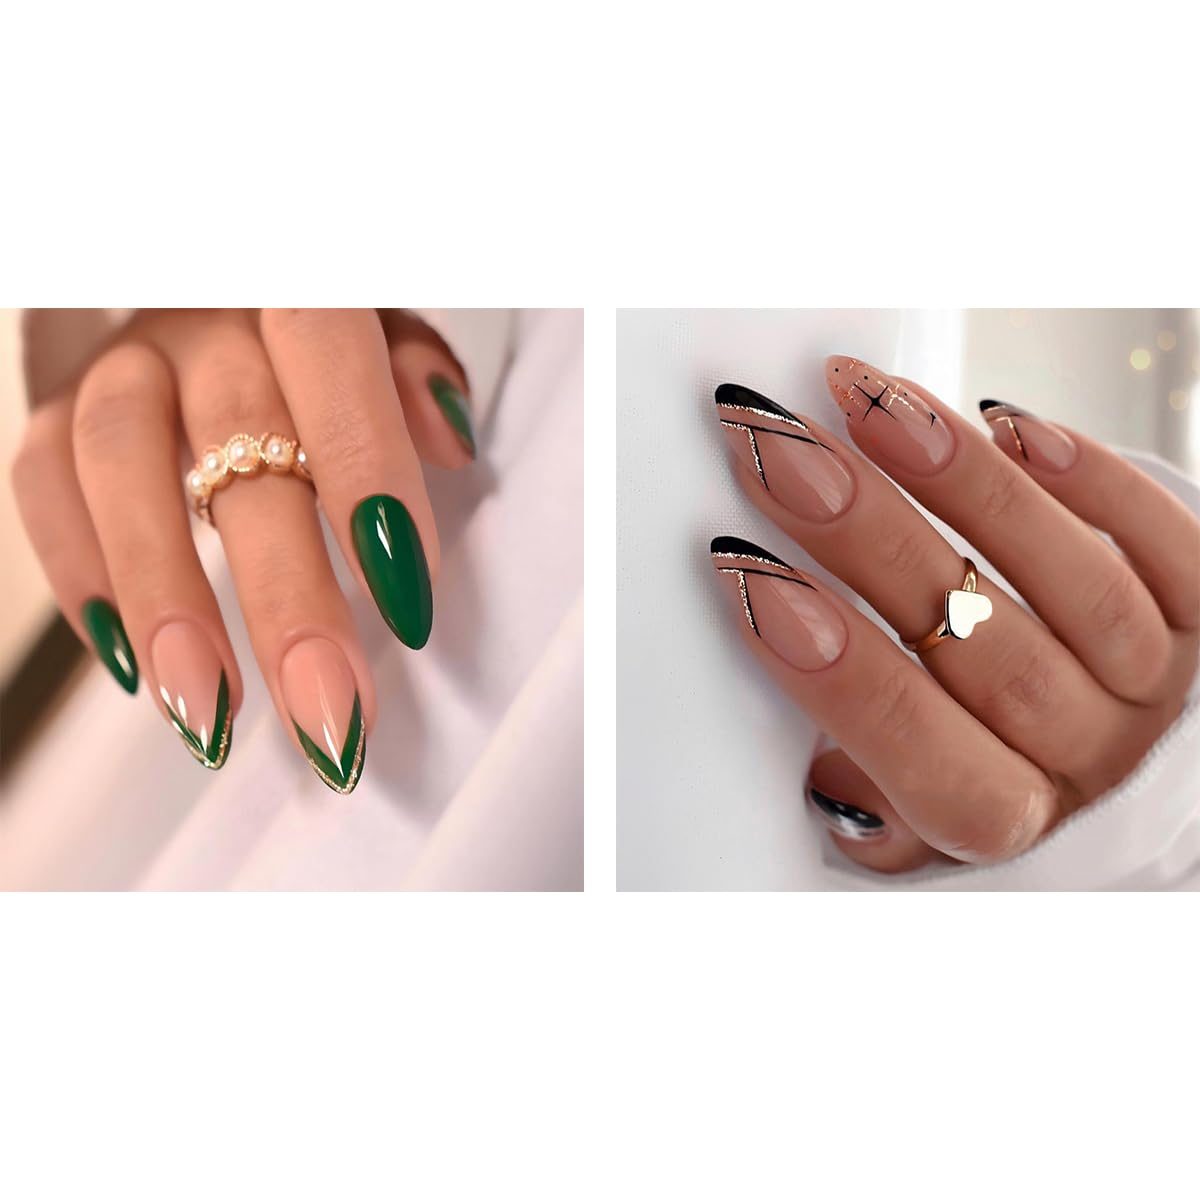 Press on Nails Medium Almond Shaped-French Tips Fake Nails Green & Black Swirl Curve Designs Acrylic False Nails with Glue on Nails for Women and Girls Nail Accessories (2 Set)